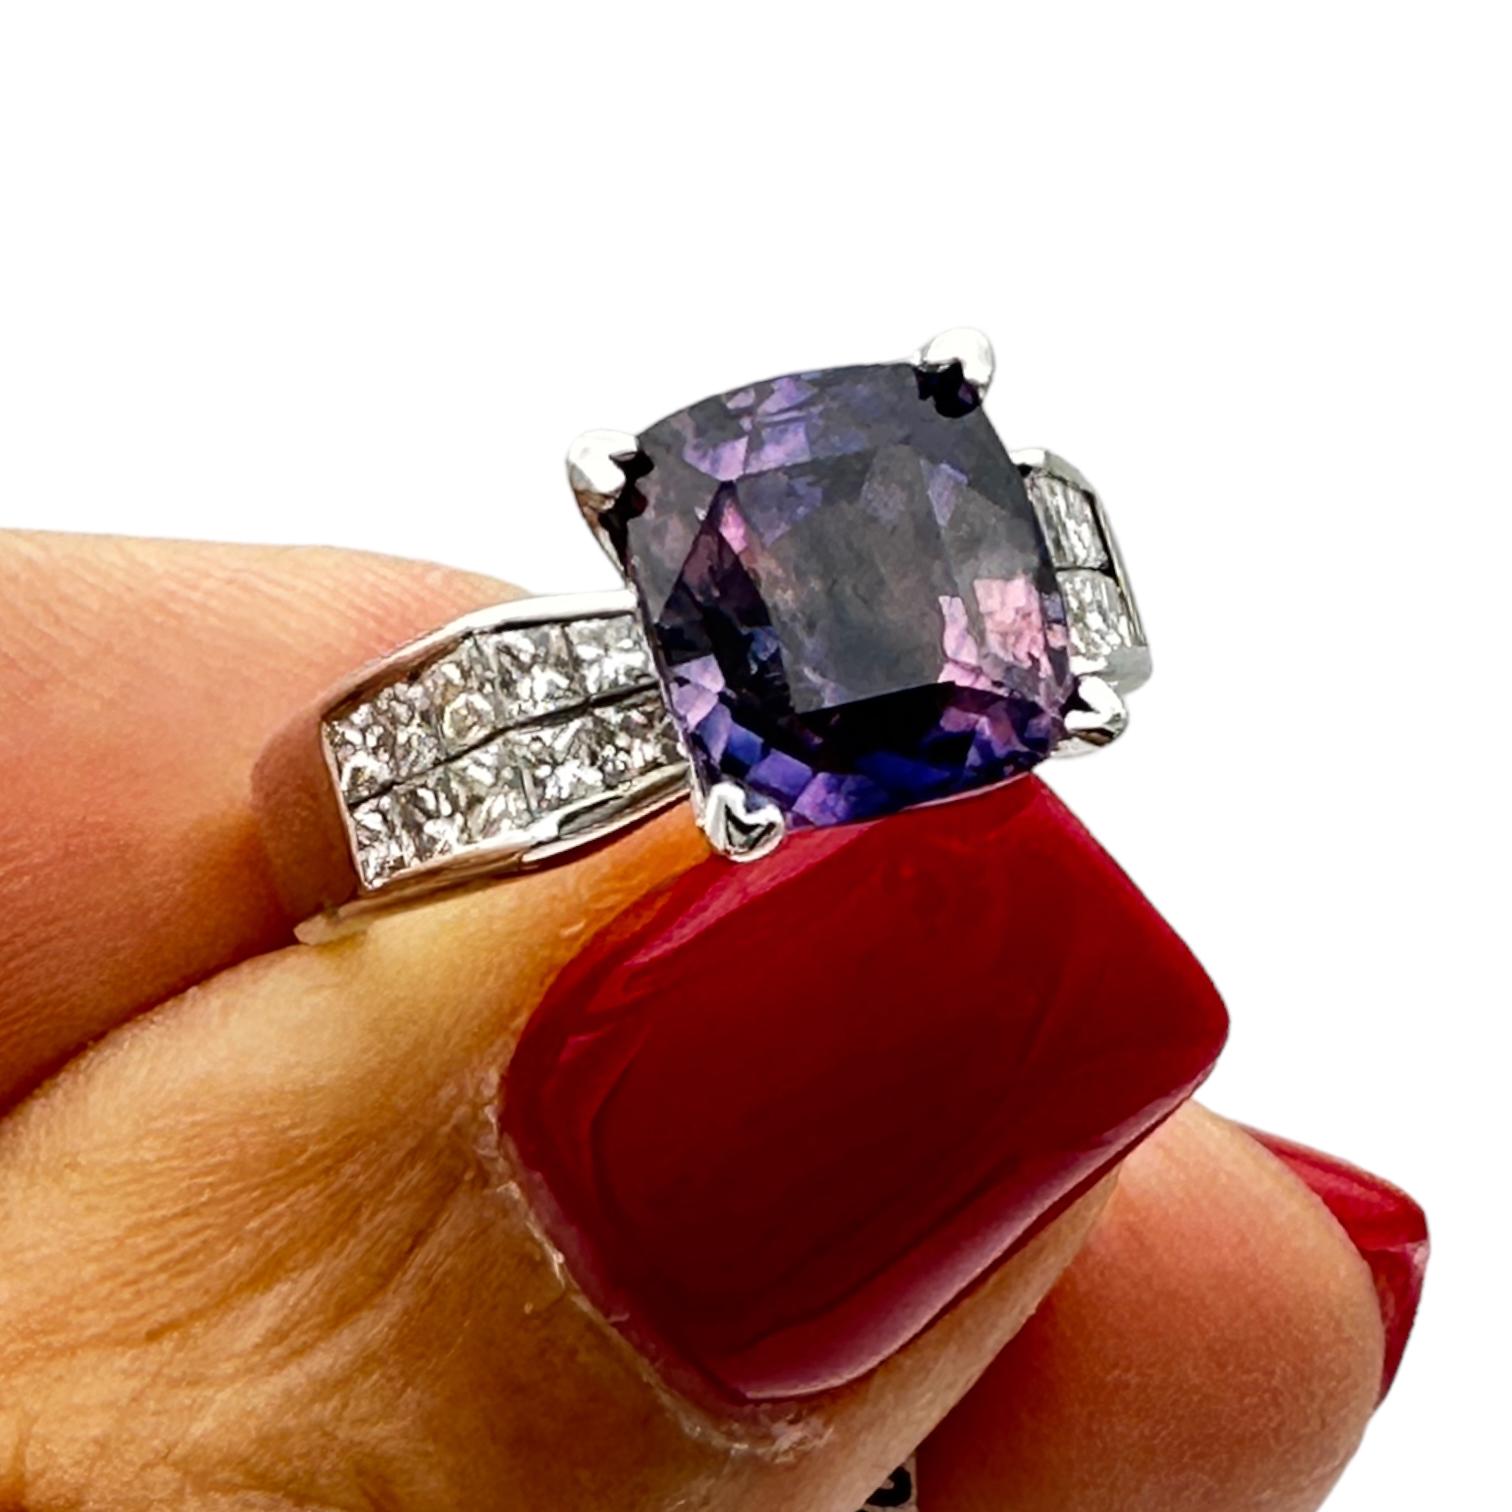 18 karat white gold ring showcases a rare, cushion cut purple sapphire solitaire diamond ring. The sapphire measures 9.18-8.05 x 5.58 mm and weighs 3.98 carats. The color of the sapphire is purple with a blue tone and is cushion cut, set into four